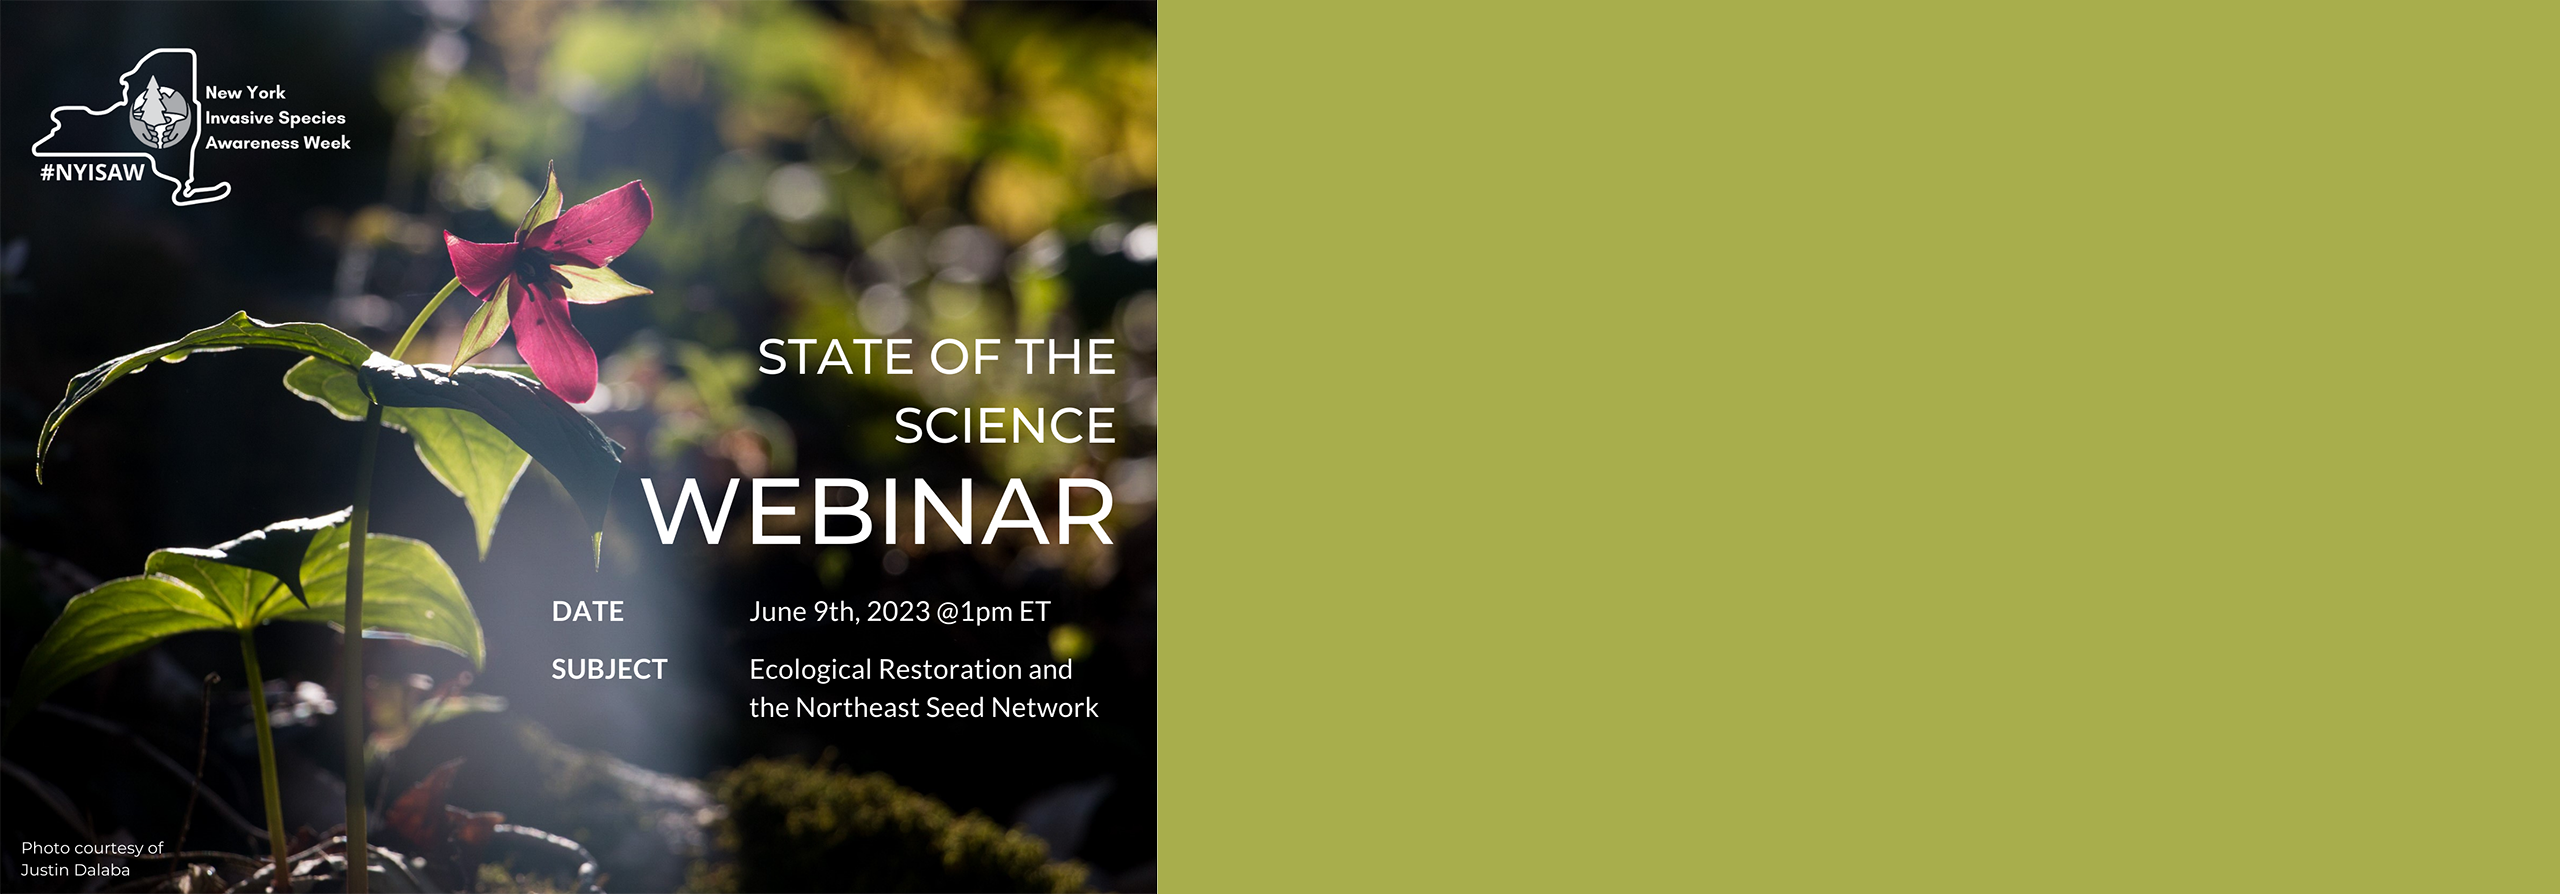 NYISAW State of the science webinar